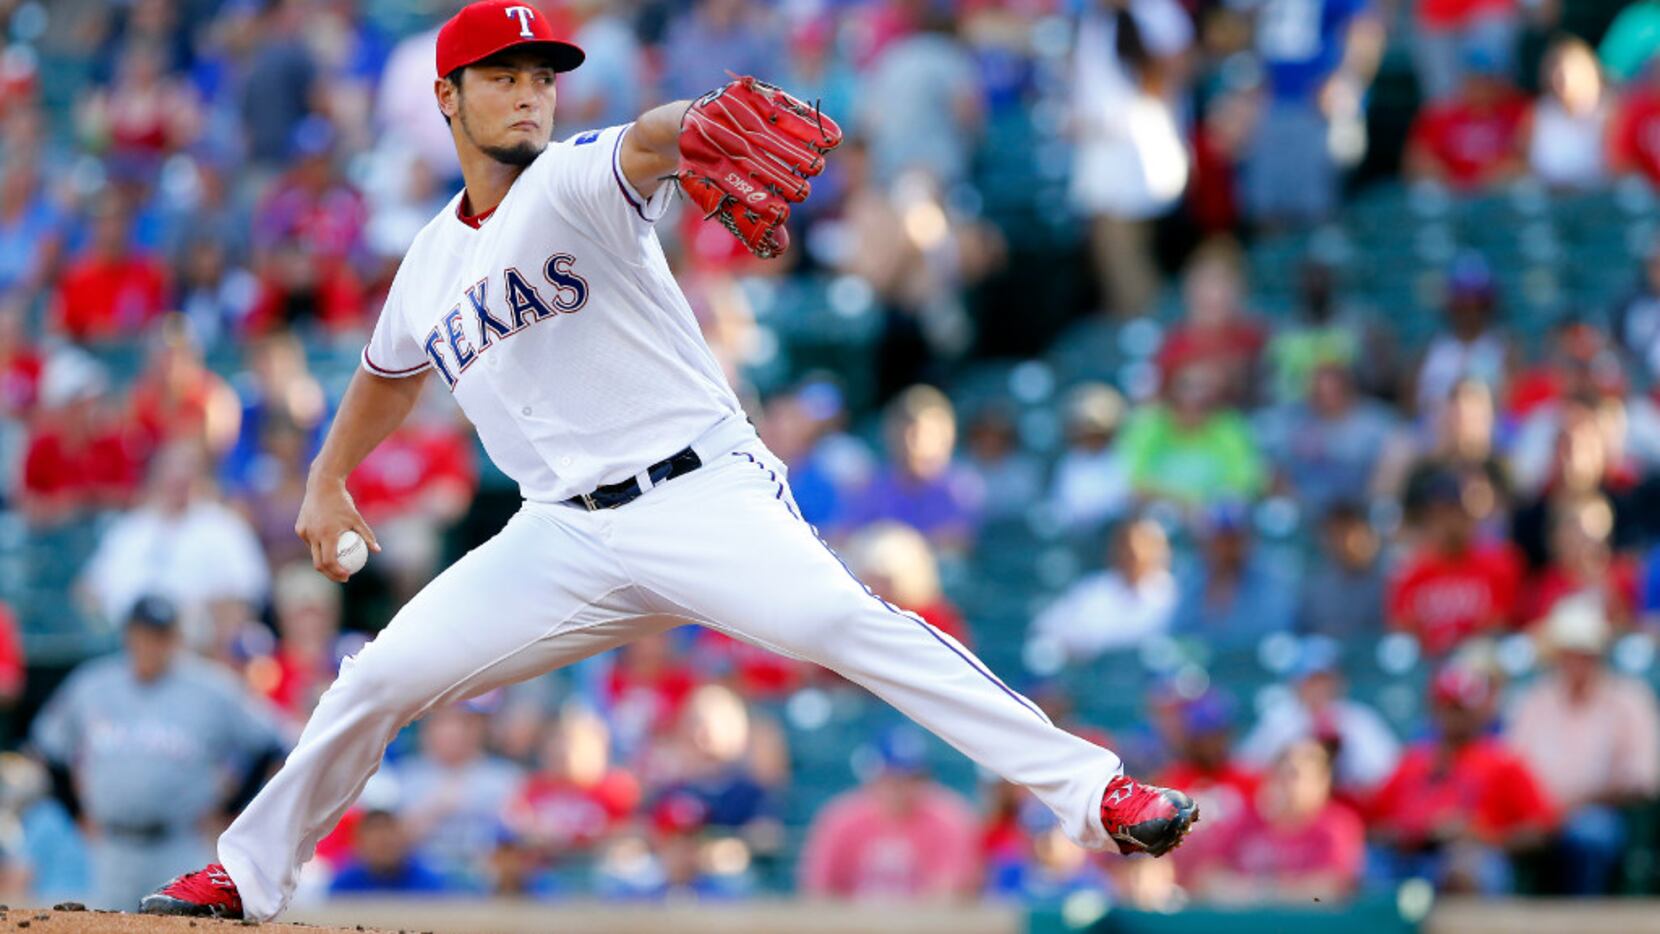 Vote: Which team will Yu Darvish be pitching for after the trade